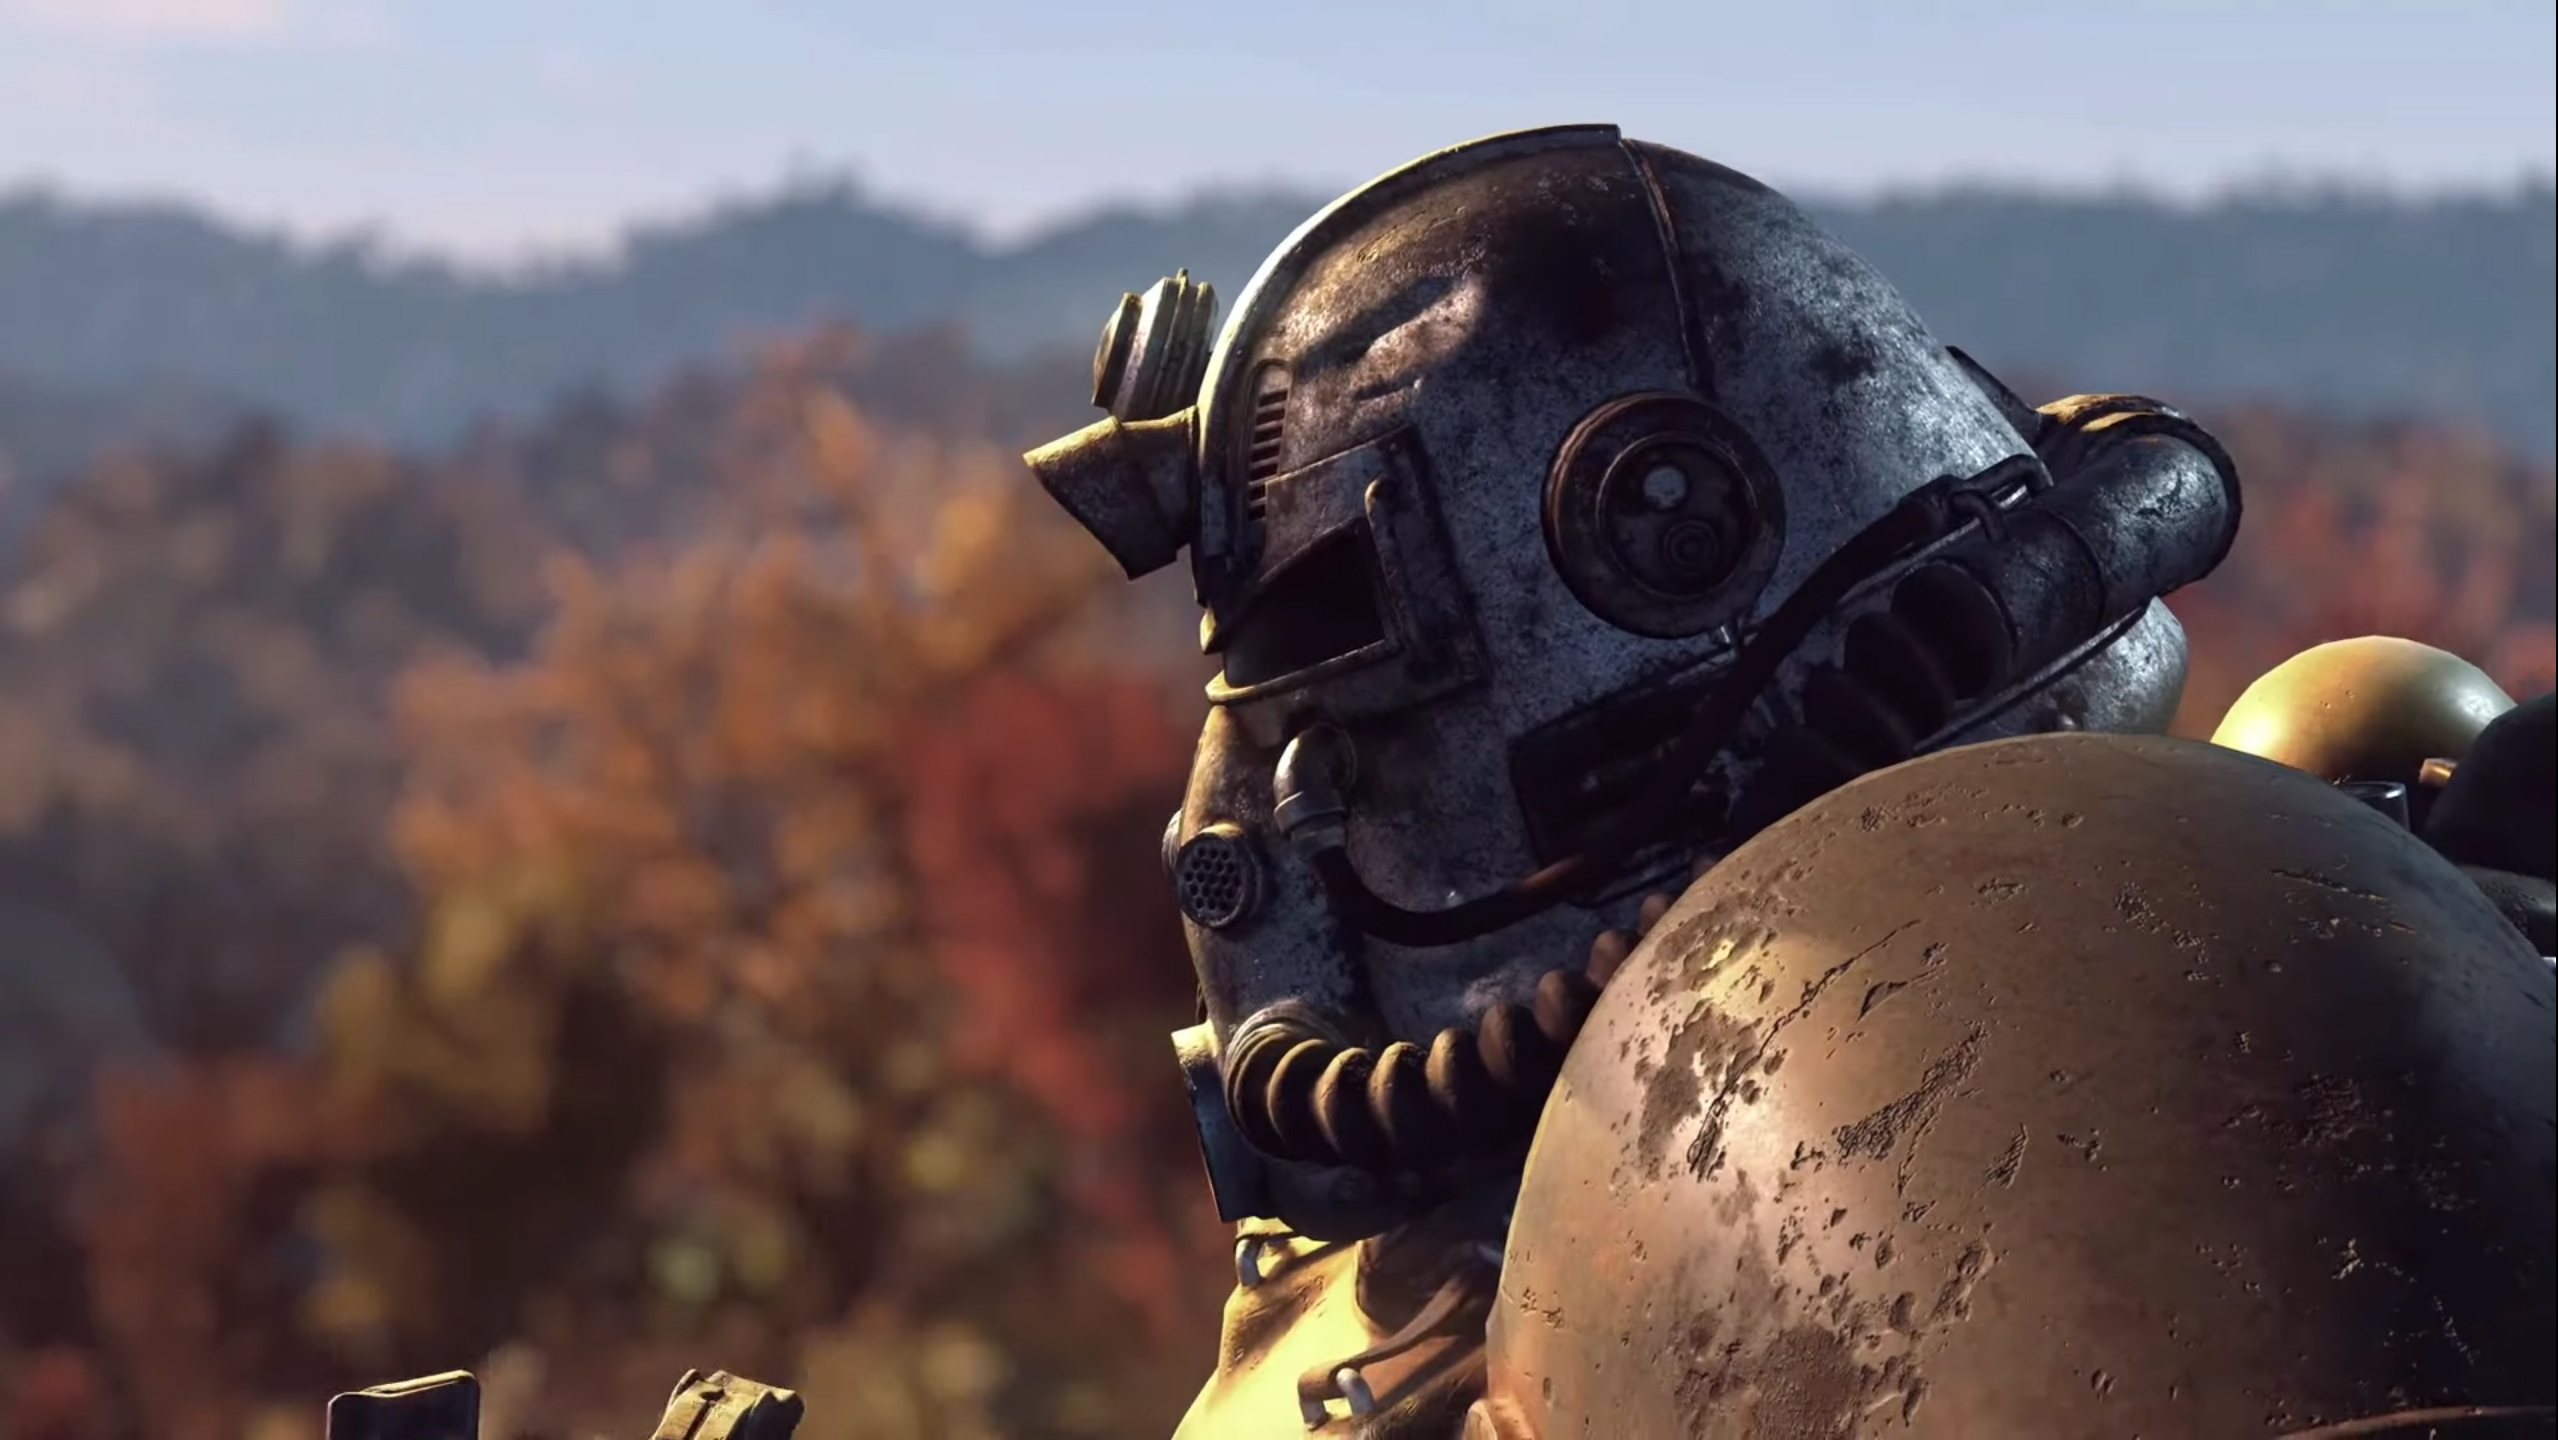 fallout 76 free to play ps4